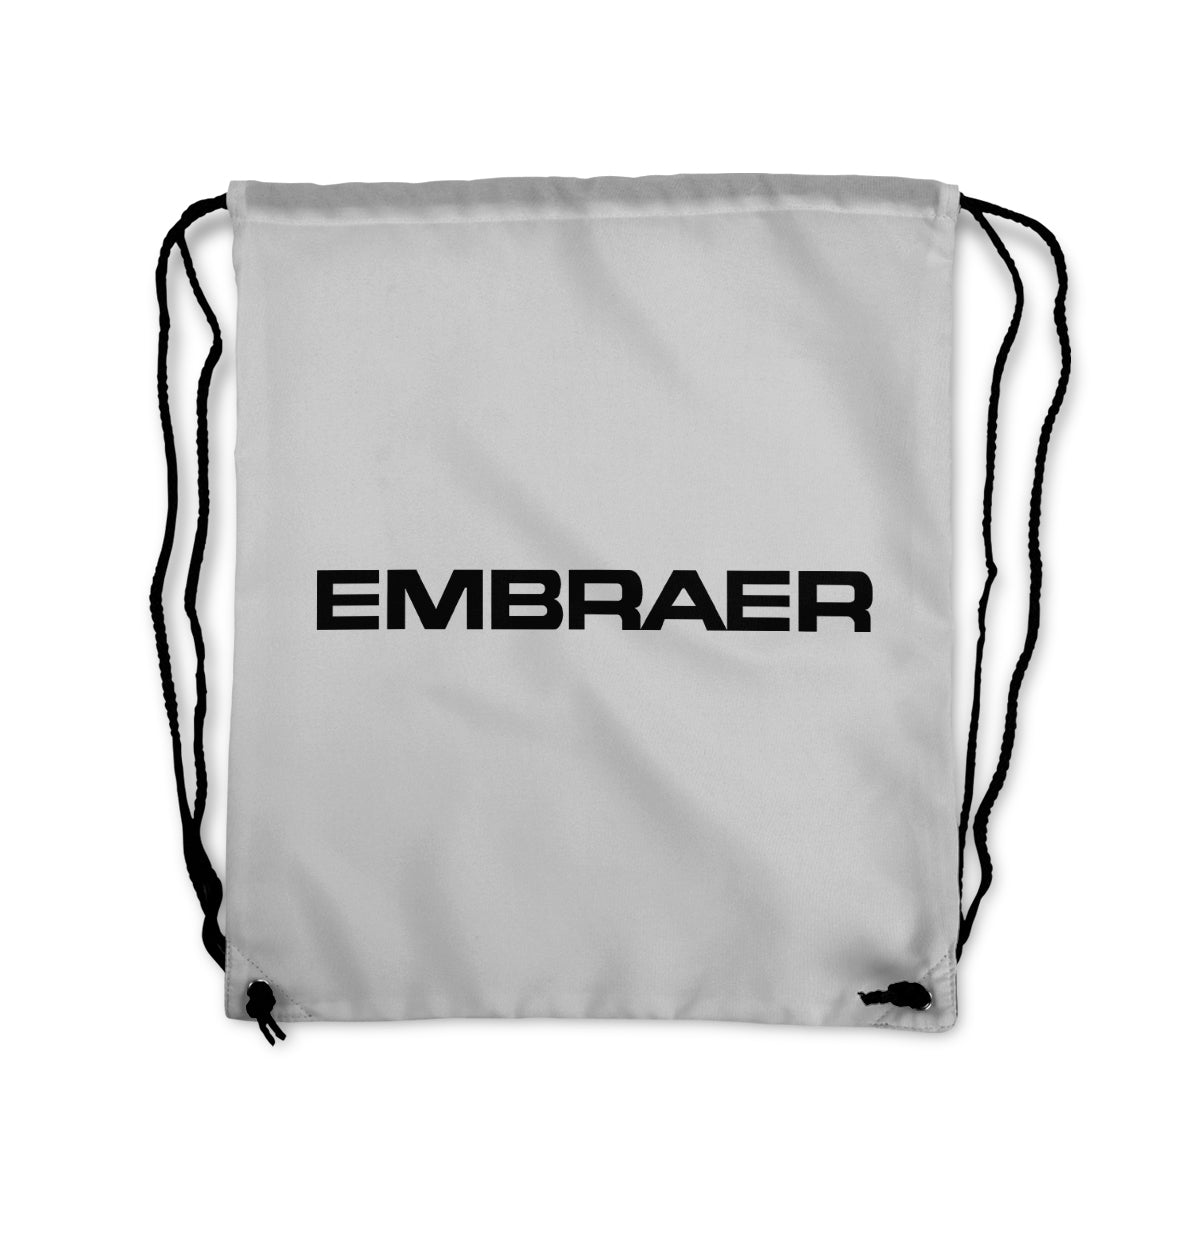 Embraer & Text Designed Drawstring Bags